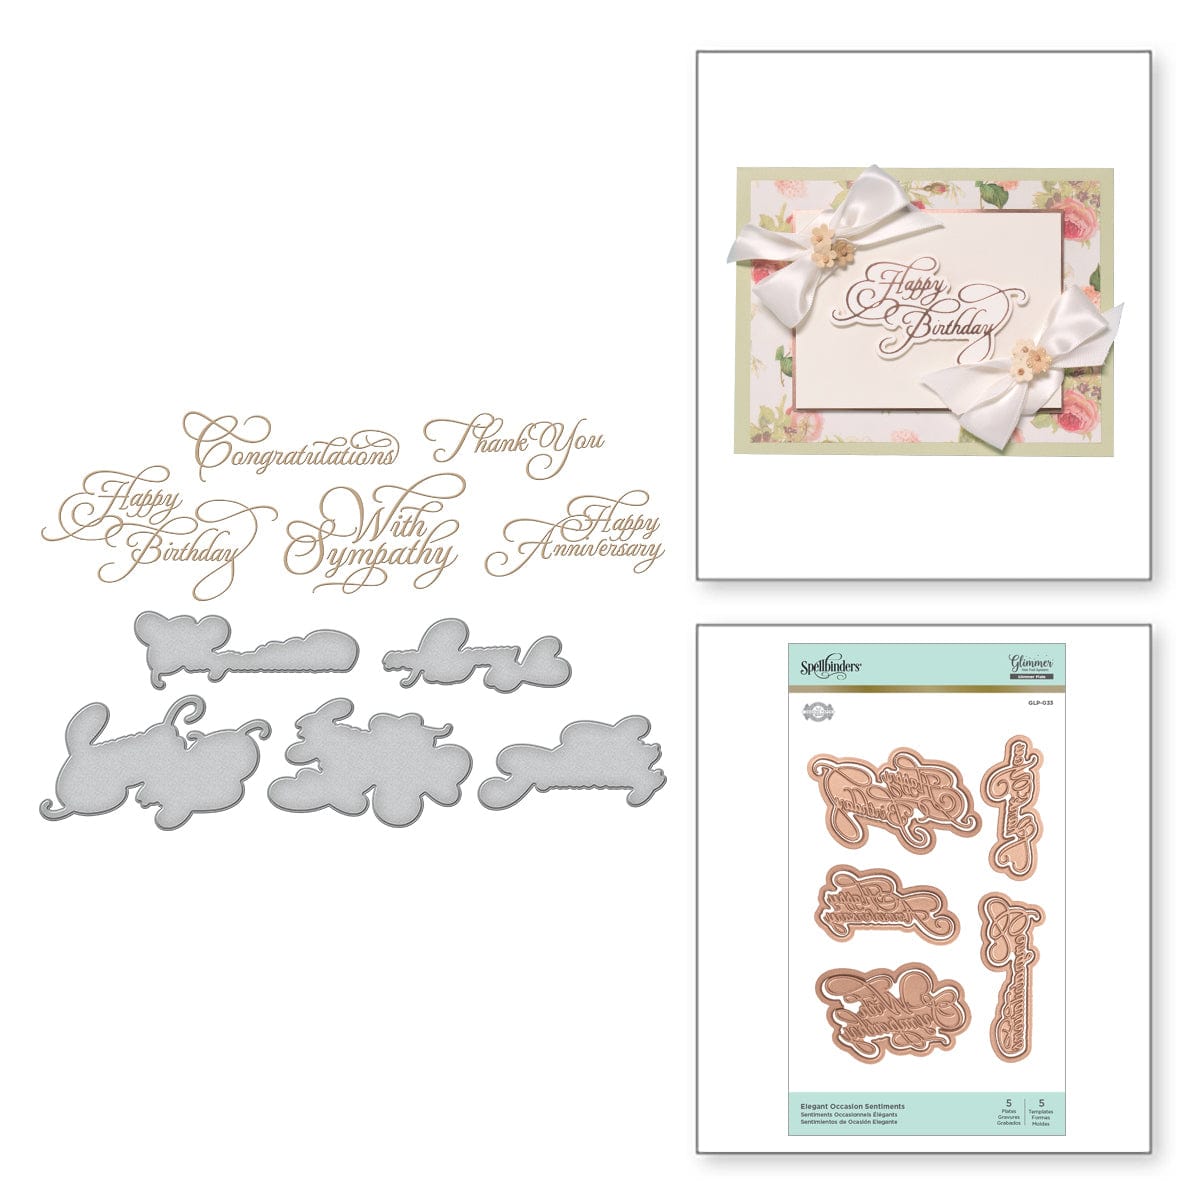 Spellbinders - Glimmer Hot Foil - Truly Yours Collection - Glimmer Plate,  Dies and Metallic Hot Foil Variety Pack- Mini Sincere Sentiments Bundle